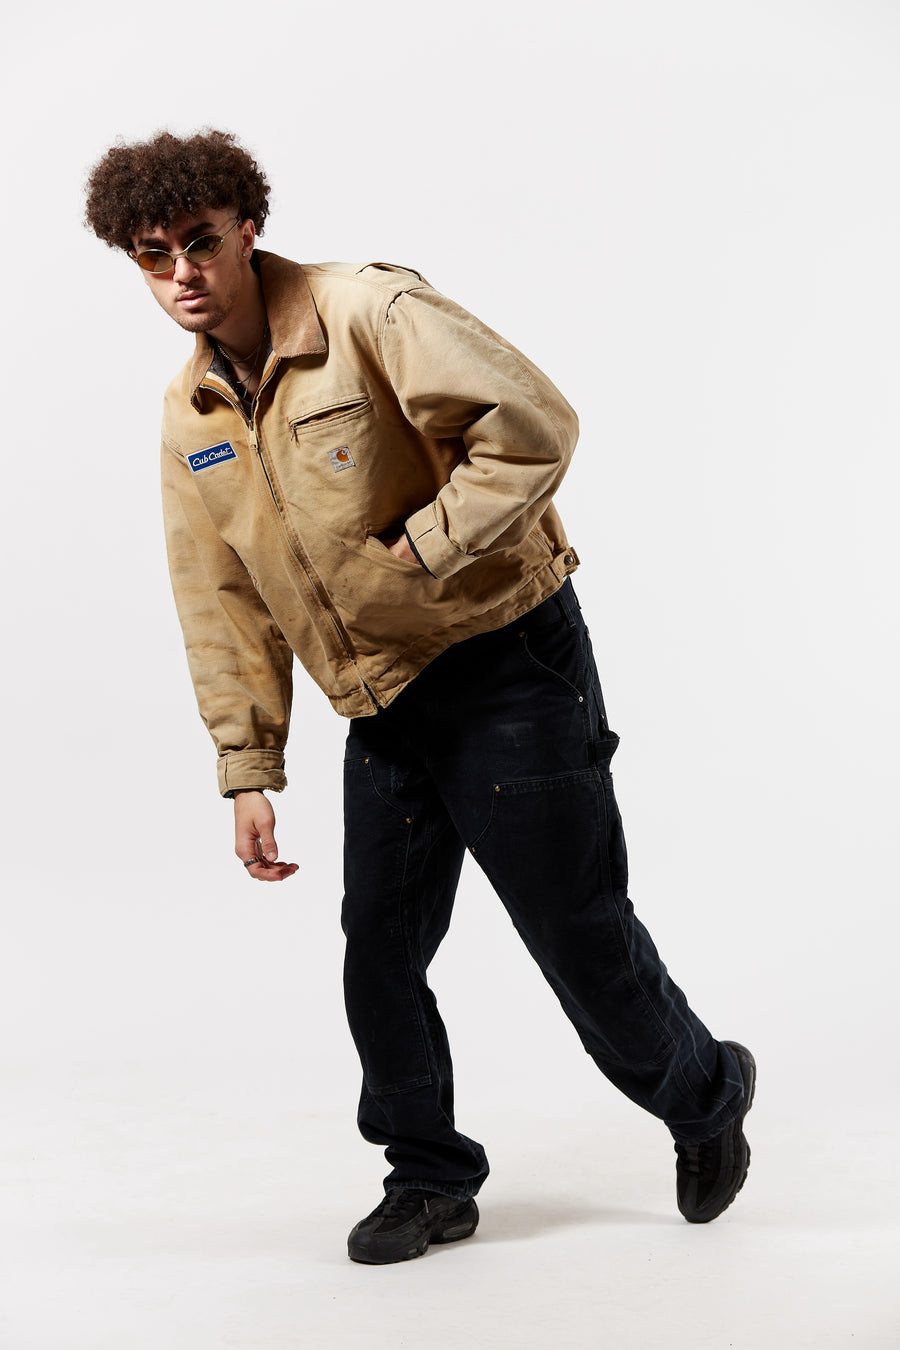 Carhartt Blanket Lined Detroit Jacket in a vintage style from thrift store Twise Studio